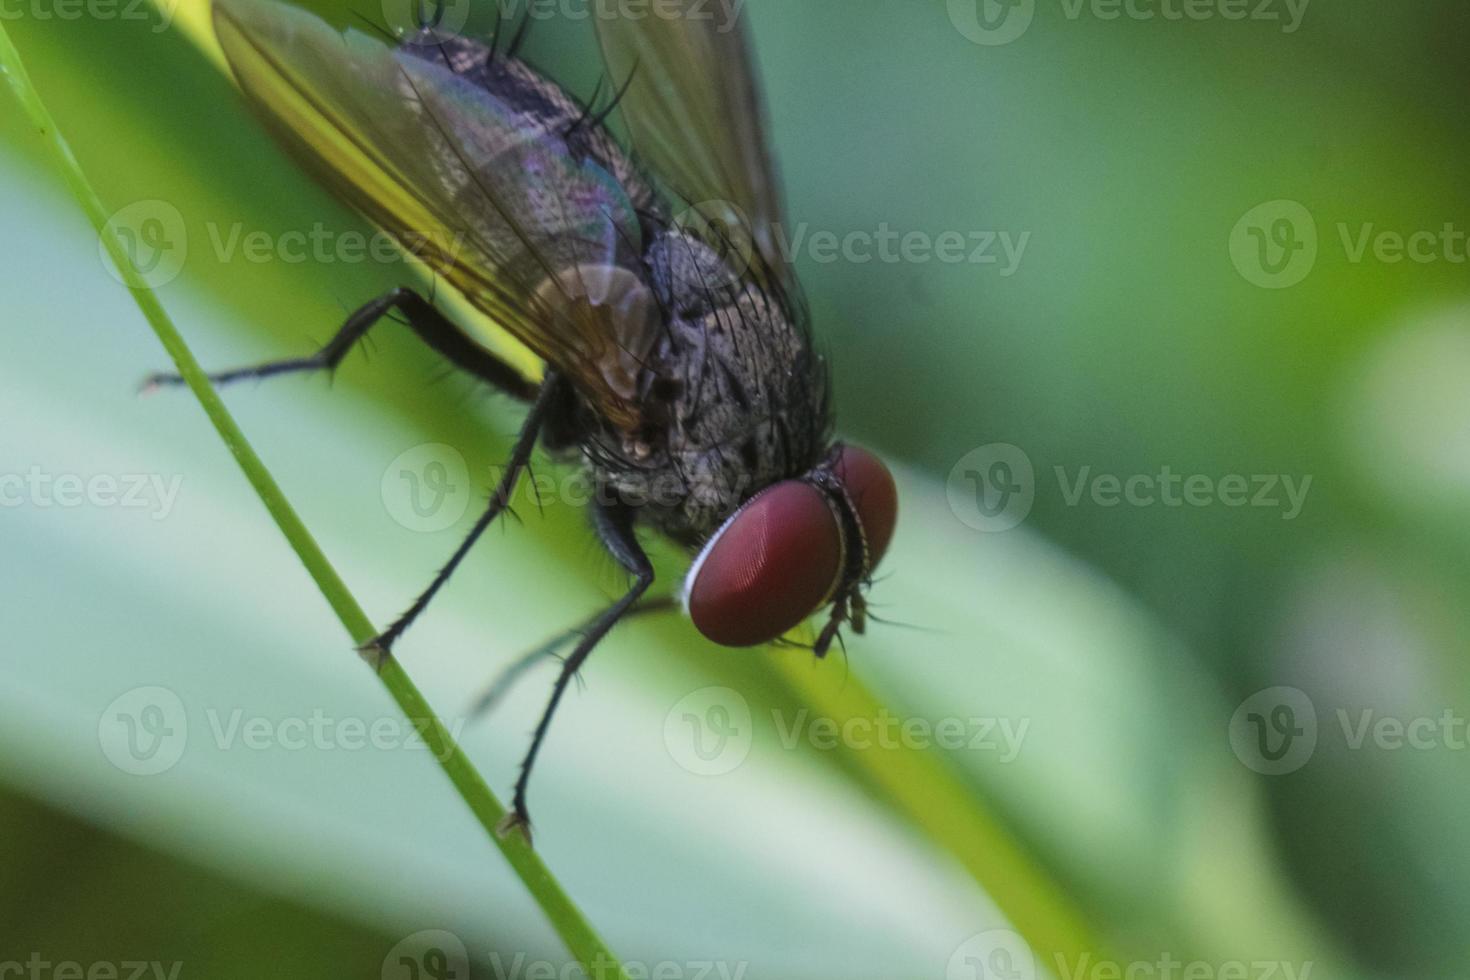 The Common Housefly (Musca Domestica) photo